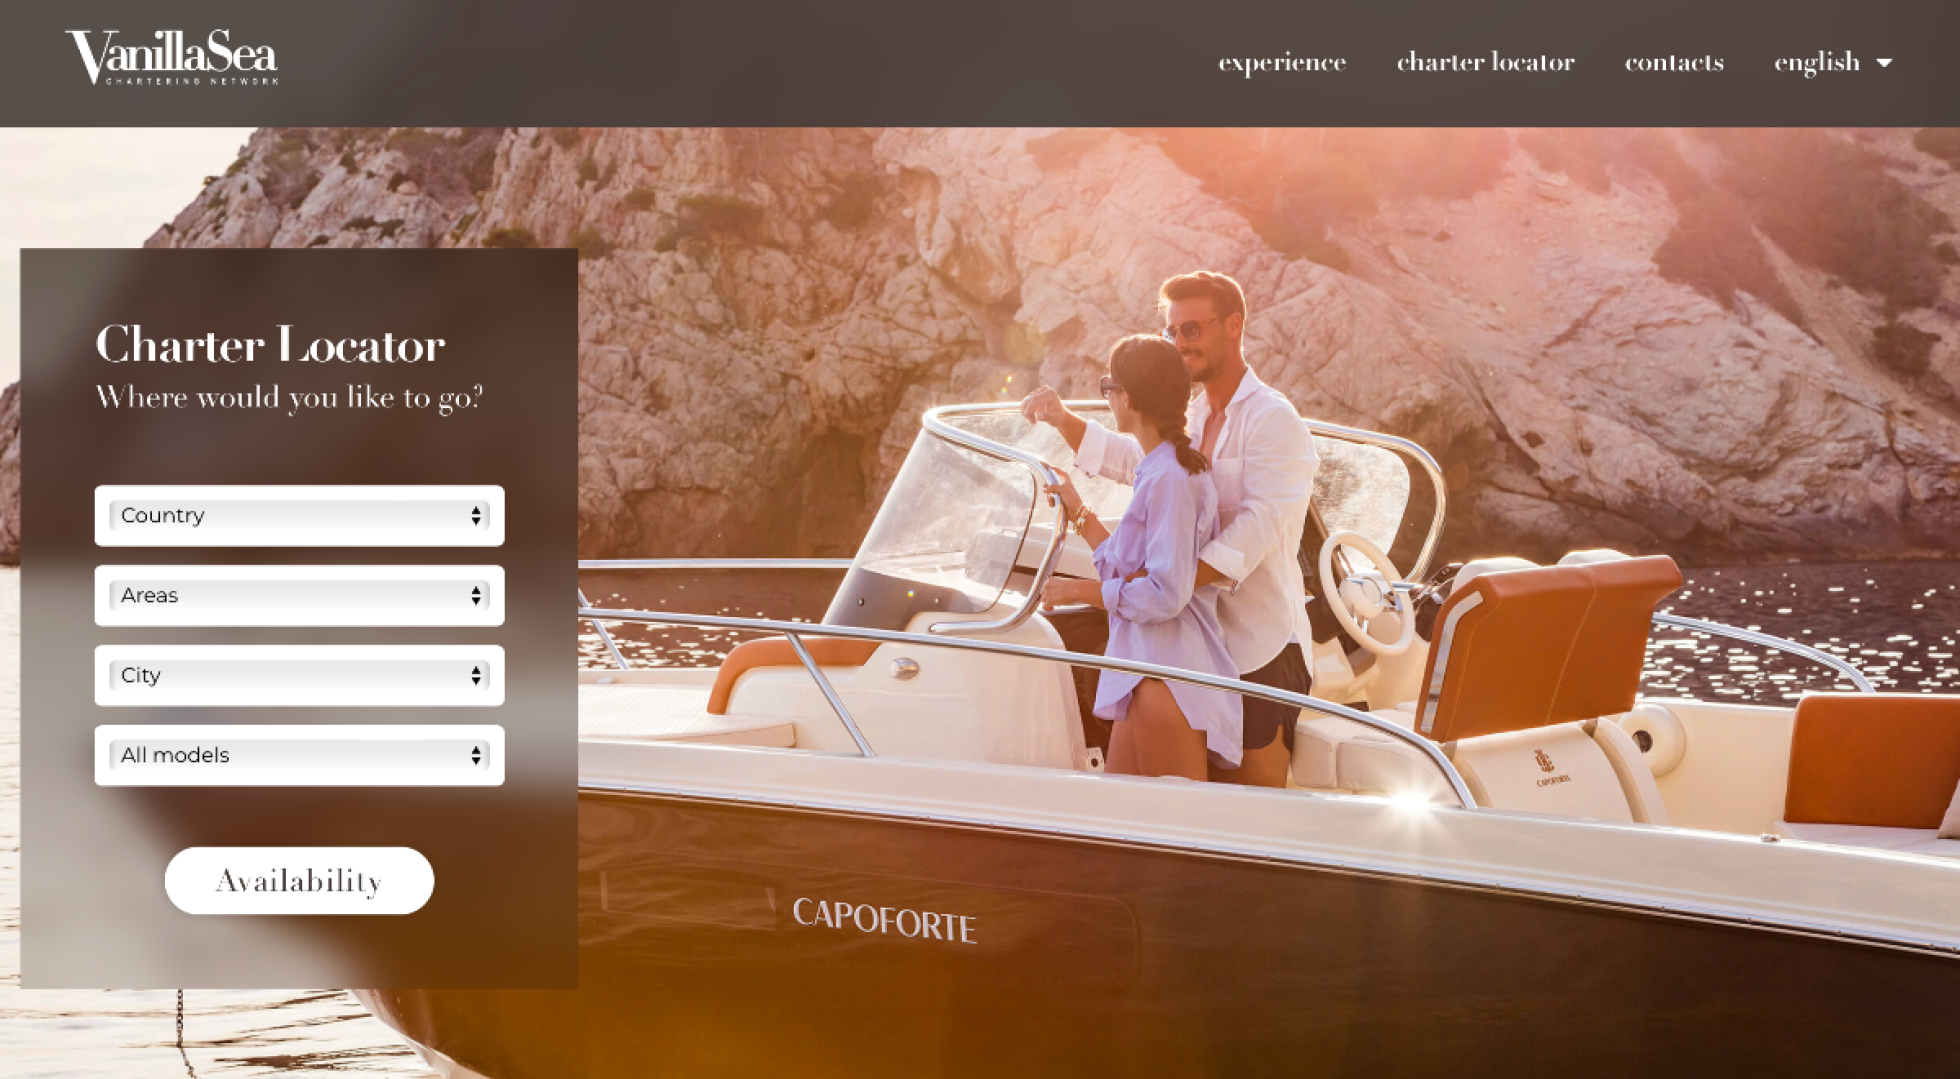 Vanilla Sea, the exclusive charter network of Invictus Yacht and Capoforte, online now